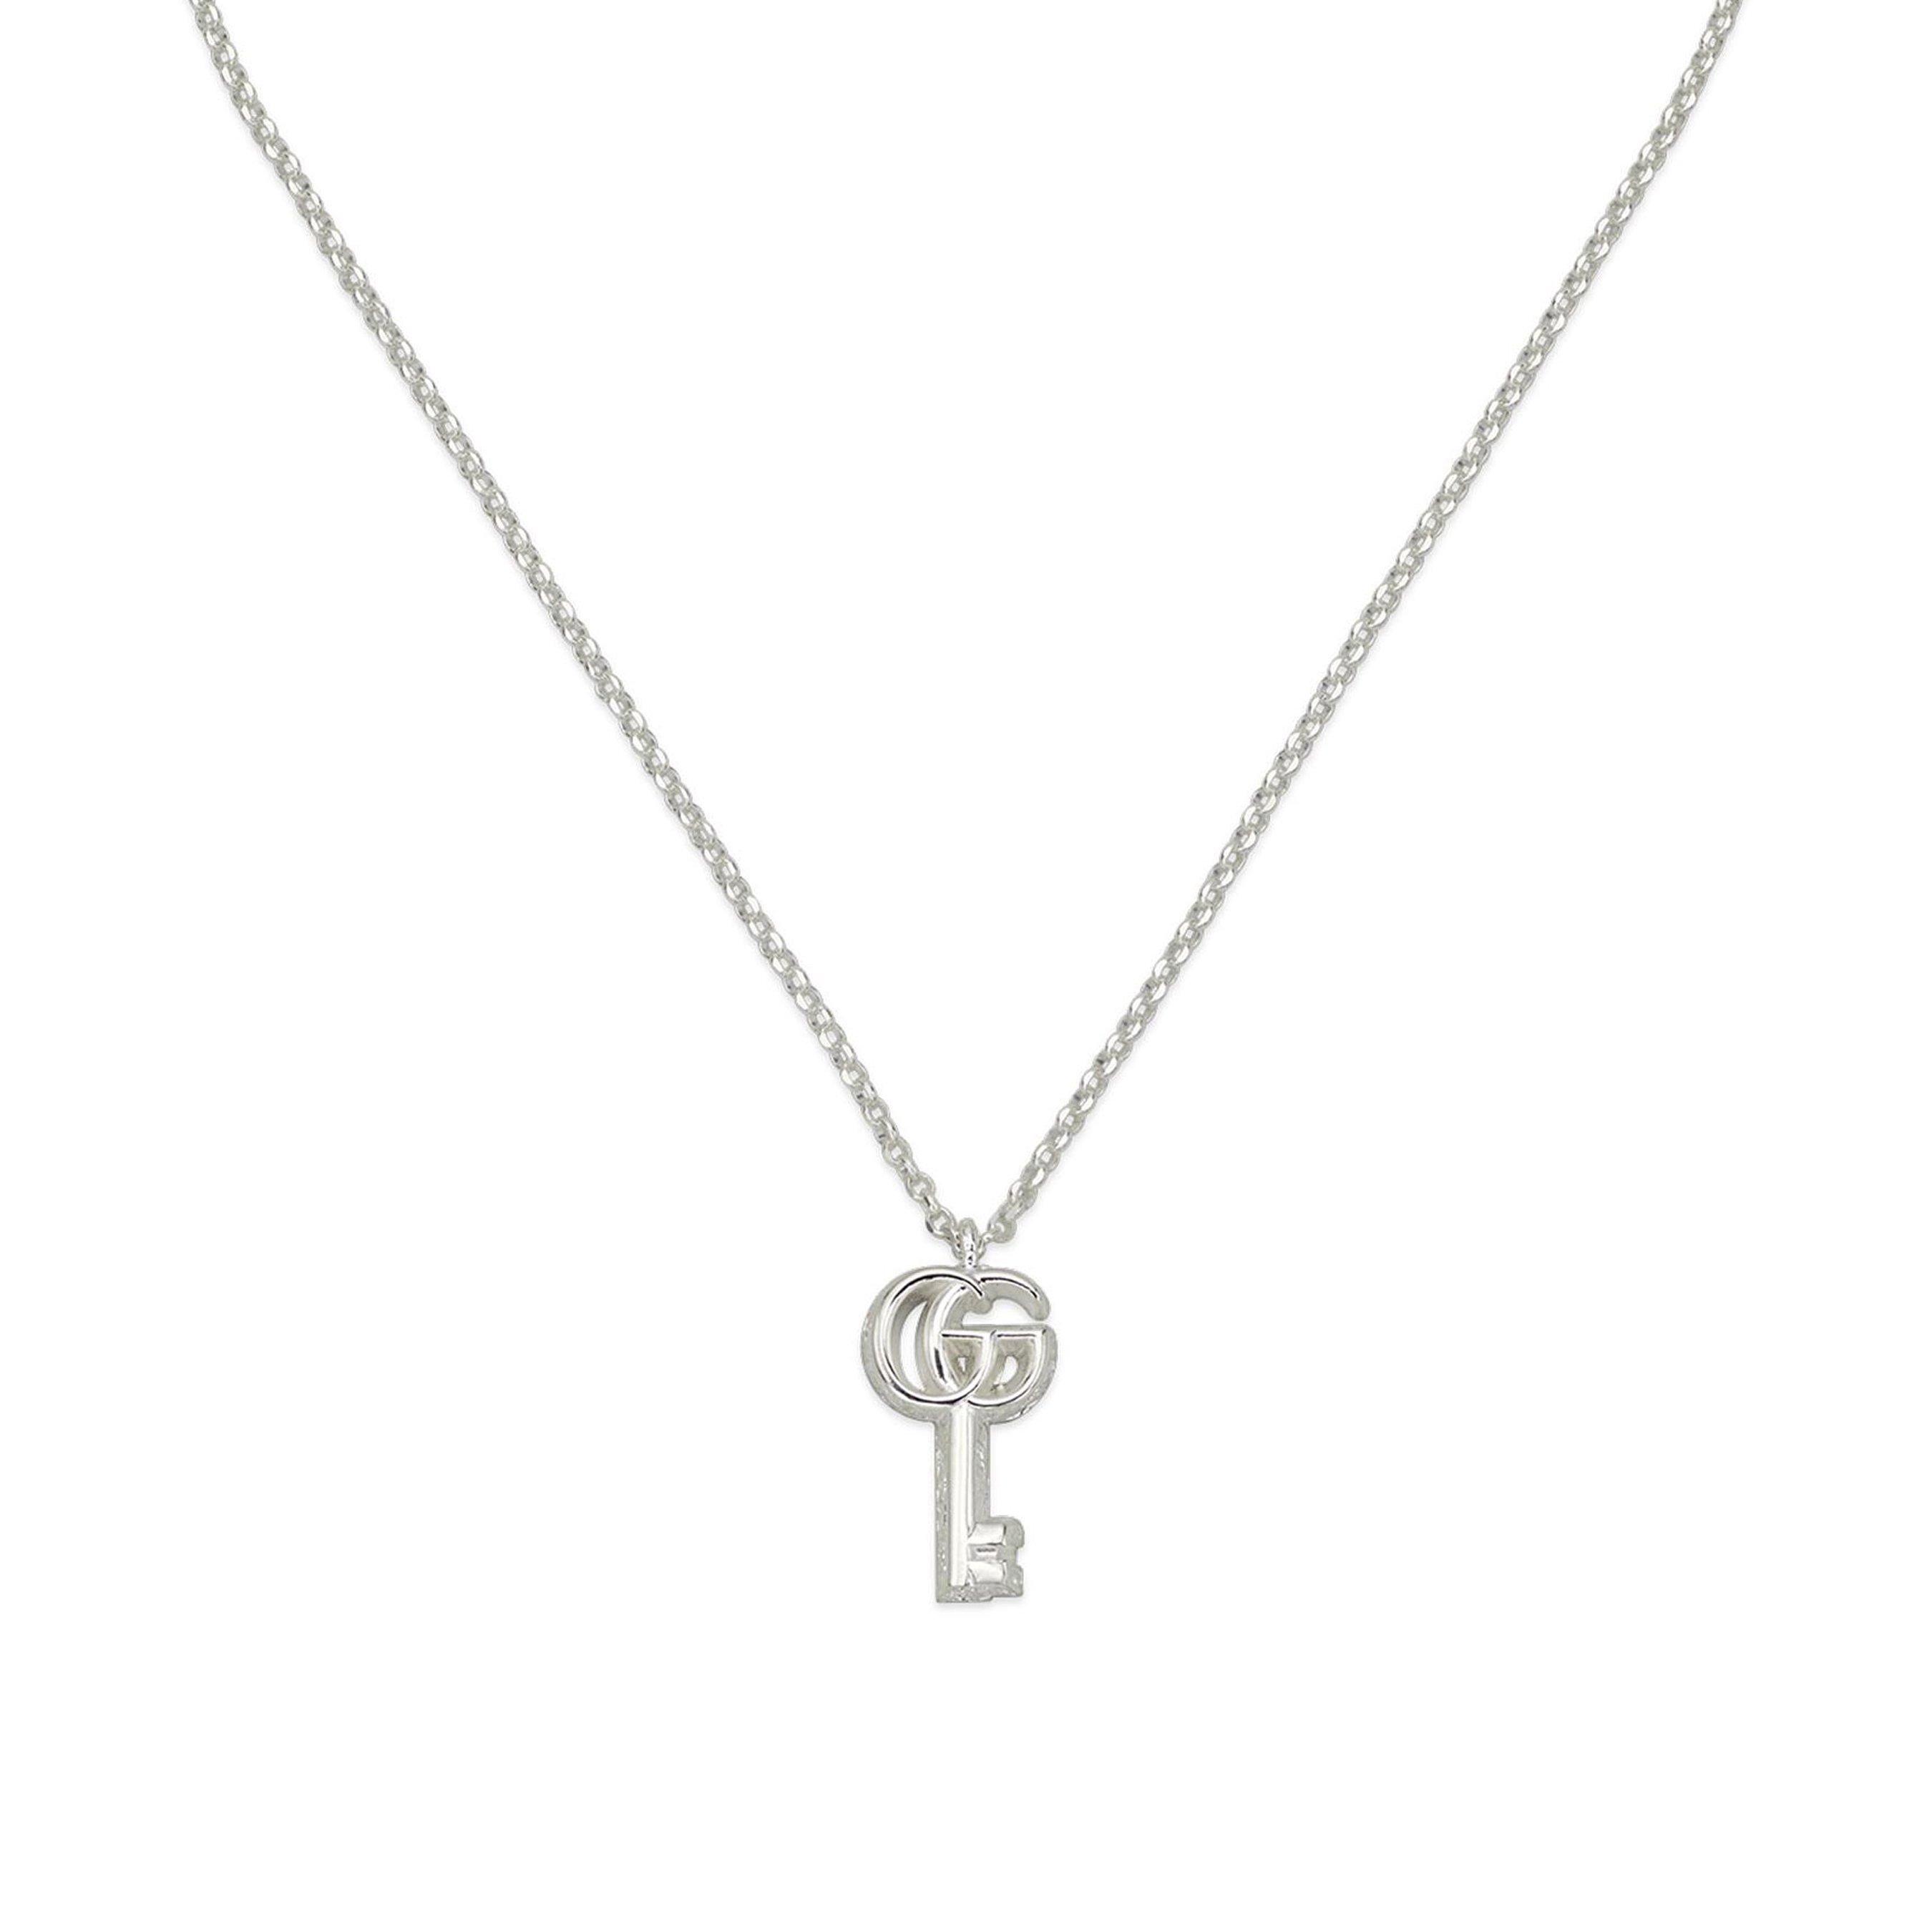 Gucci GG Marmont Key Silver Pendant | 0137751 | Beaverbrooks the Jewellers